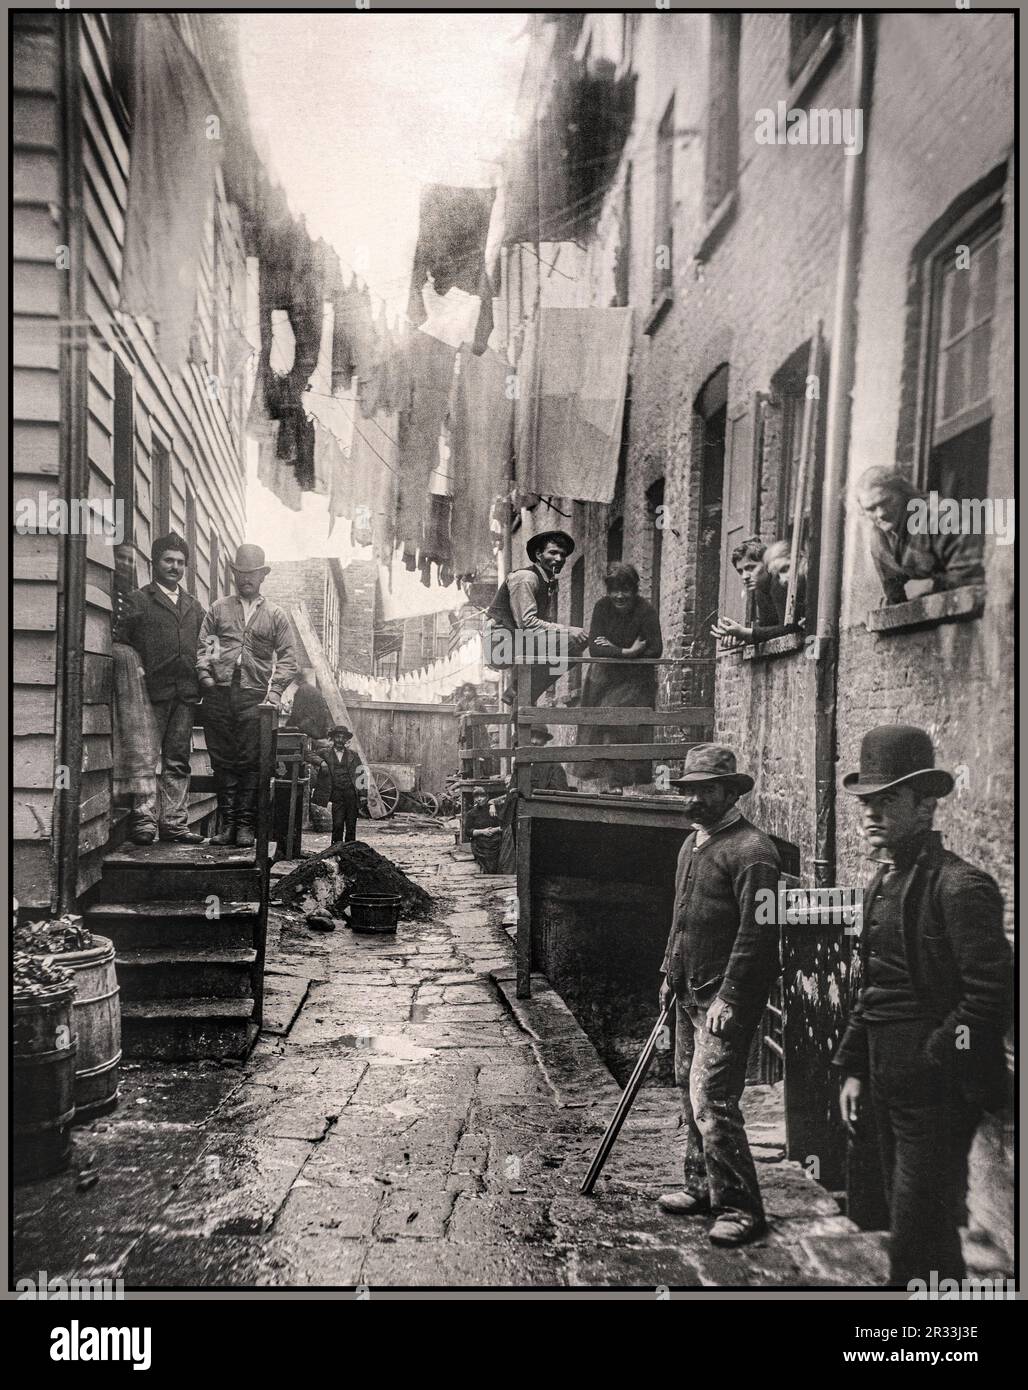 Bandits' Roost, 59 Mulberry Street. Gelatin silver print, Jacob August Riis Date 1888 New York crime neighbourhood with men posing in their lawless run down home street New York America USA Stock Photo